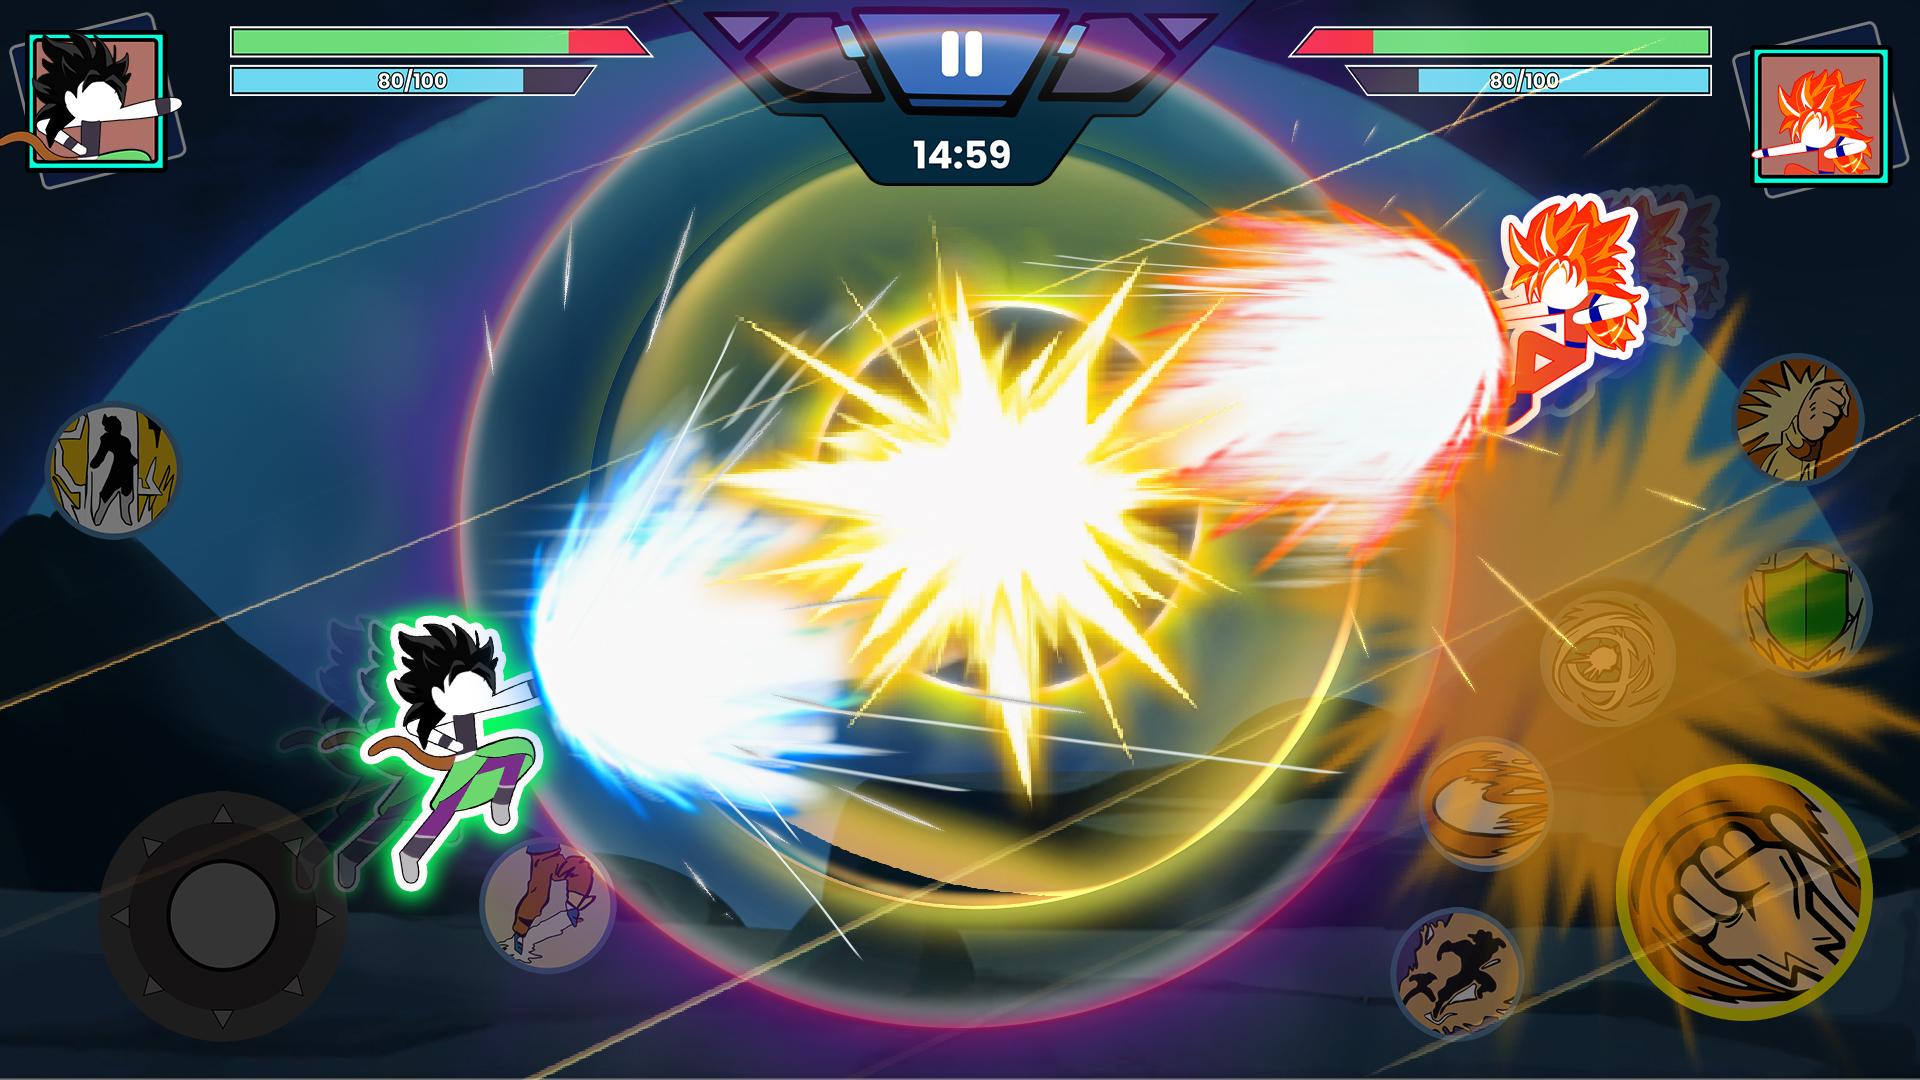 Stickman Fighter Infinity - Apps on Google Play